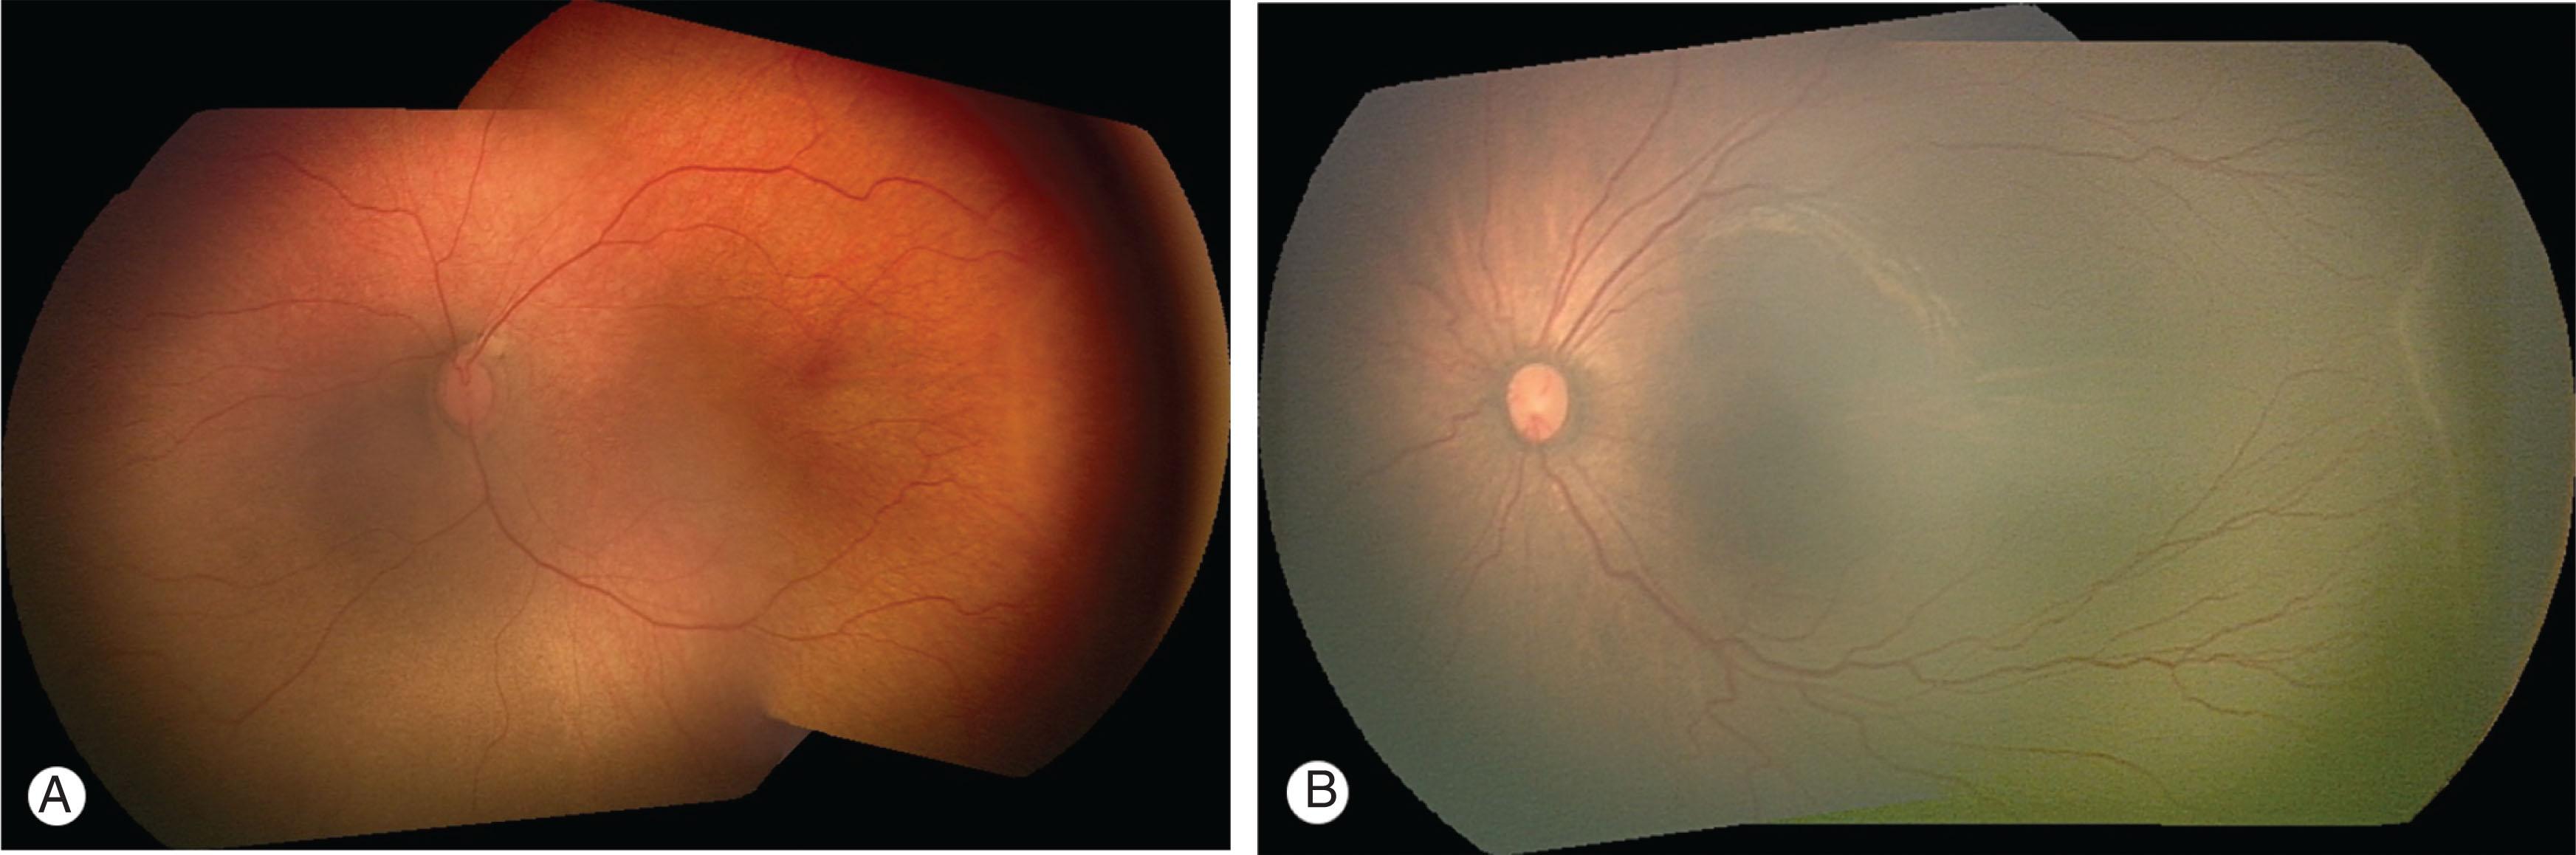 Fig. 43.4, Mild retinopathy of prematurity. Differentiating stage 1 (A) and stage 2 (B) can be difficult clinically. Note the subtle demarcation line temporally in stage 1 compared to the thicker line with an anterior shadow, indicating ridge elevation, in stage 2.